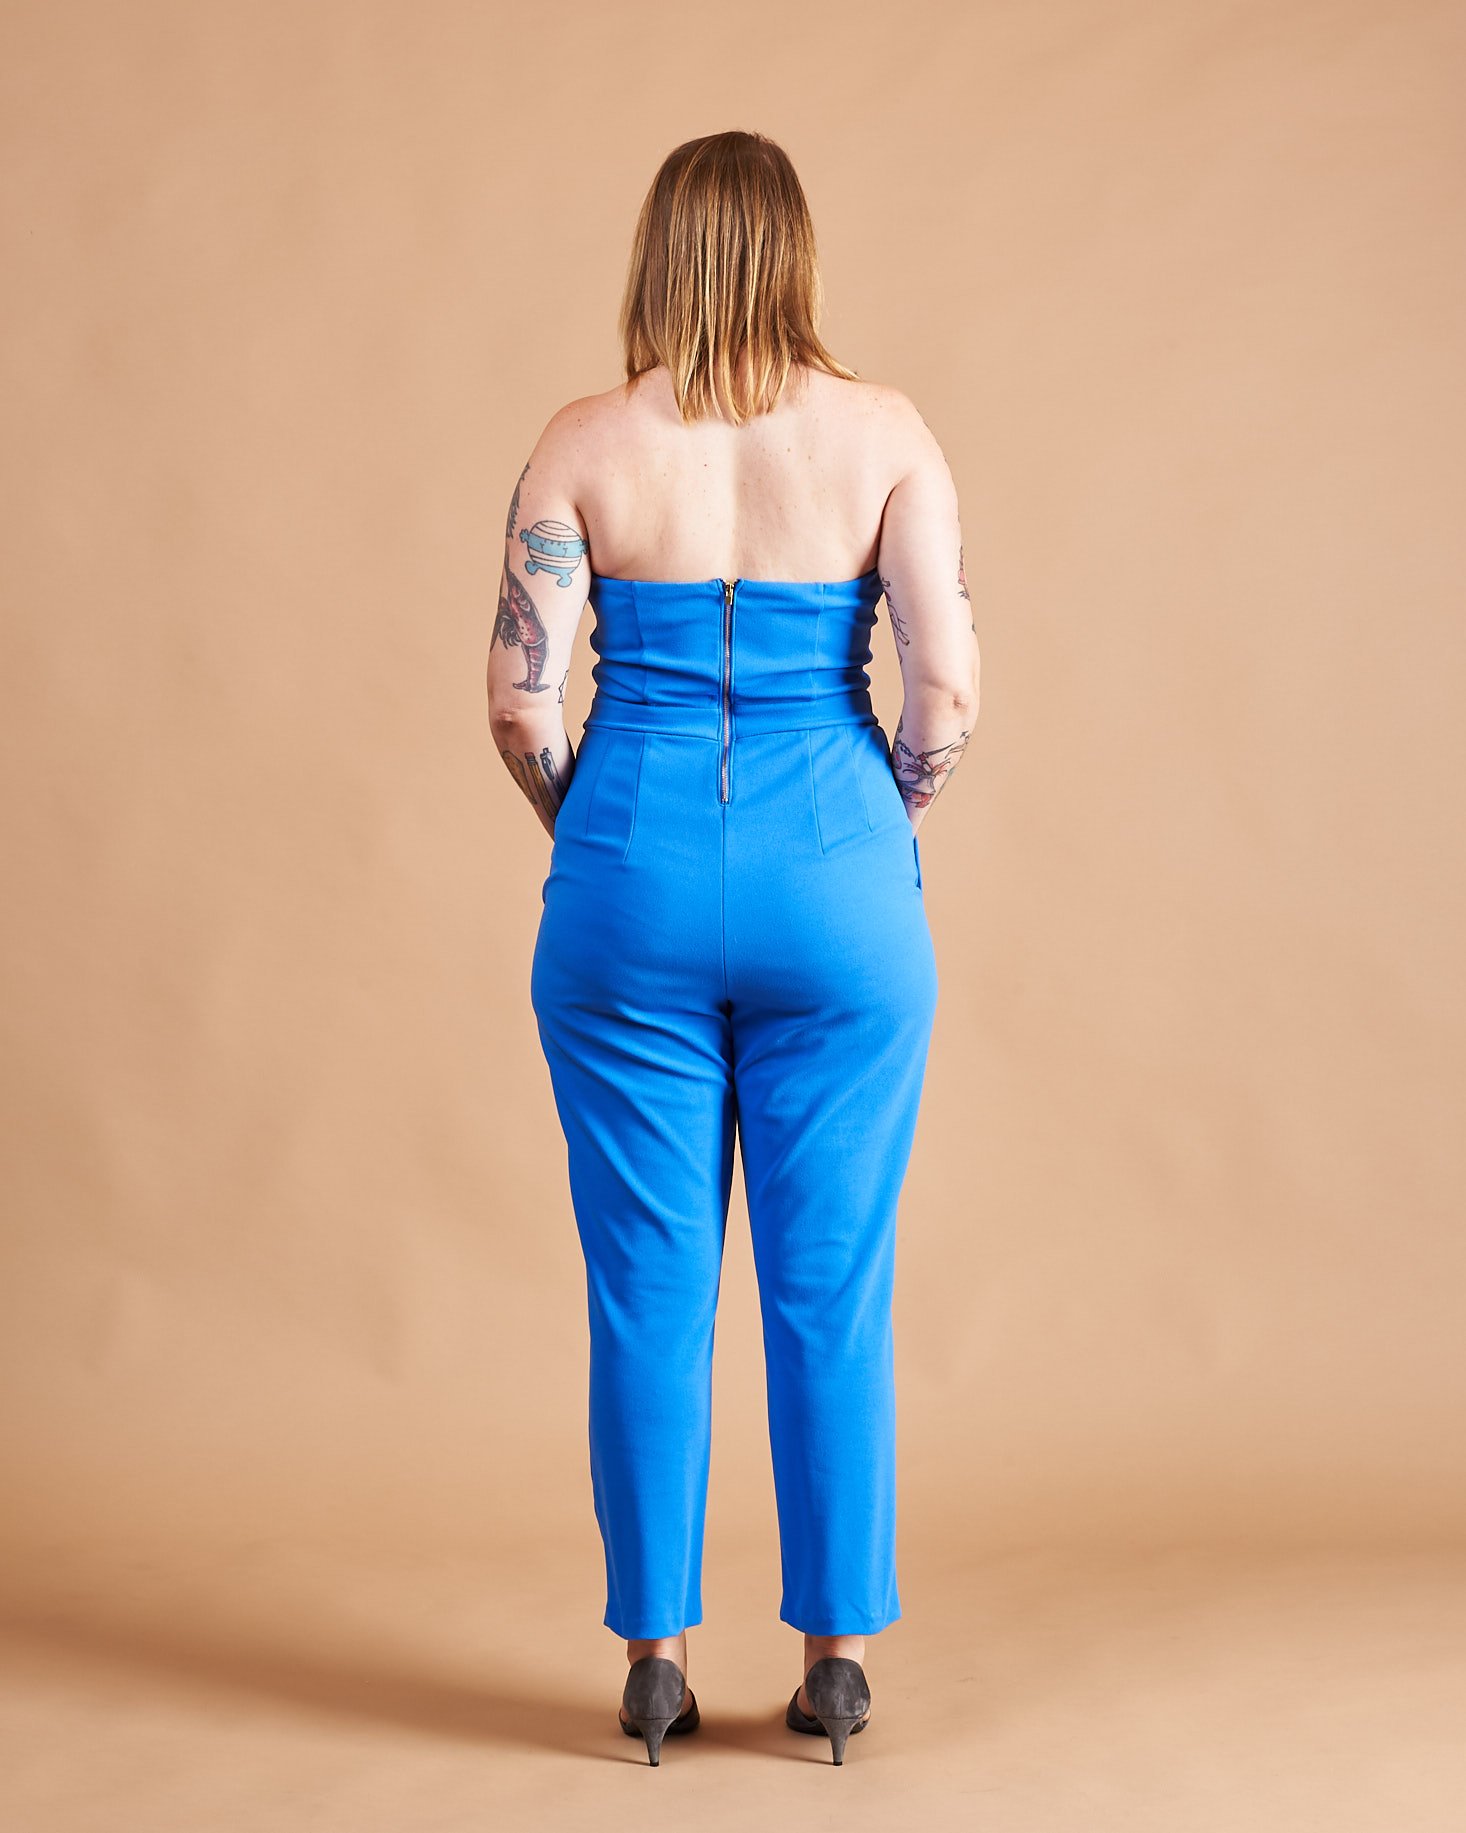 Marne in Strapless Sweetheart Neck Jumpsuit in Bright Blue - back